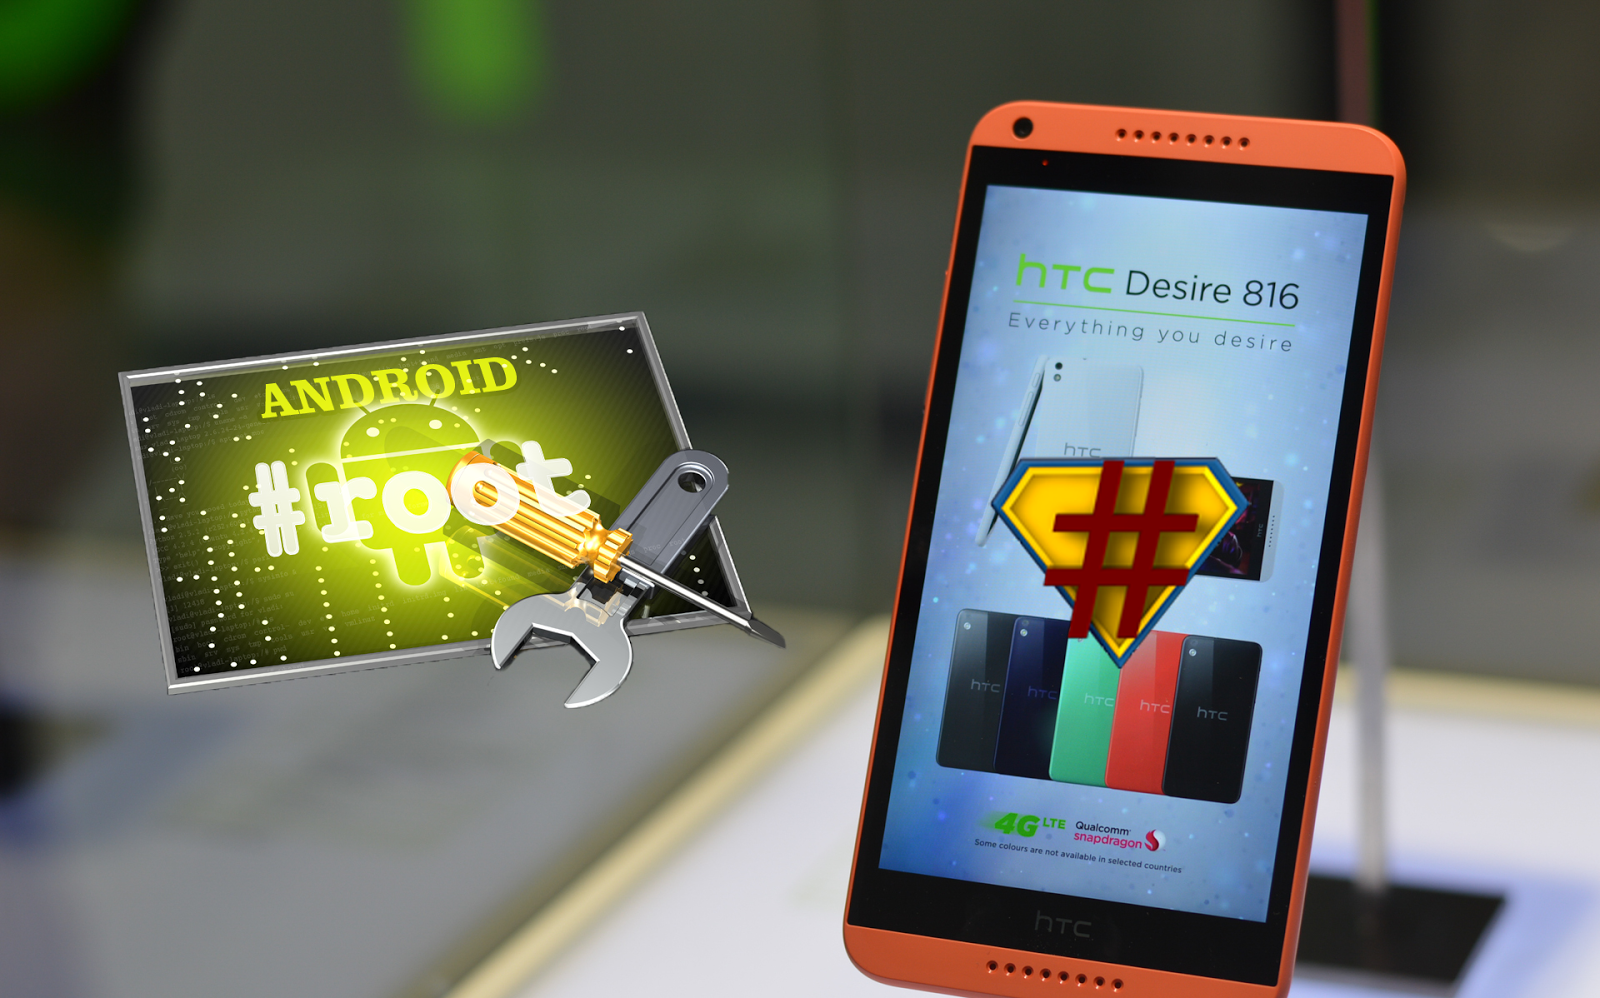 How to Root HTC Desire 816